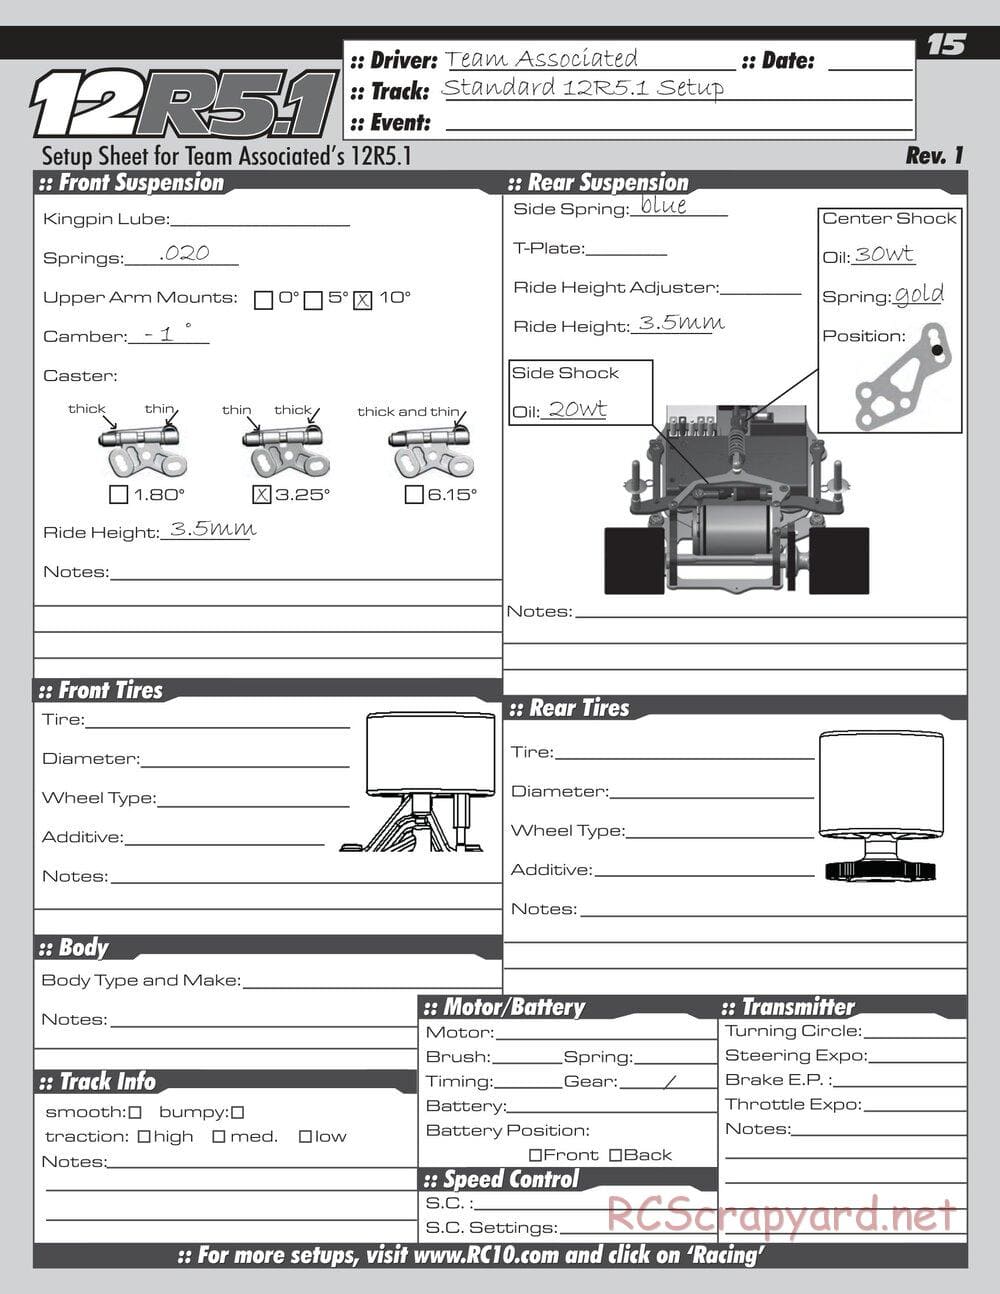 Team Associated - RC12R5.1 Factory Team - Manual - Page 15